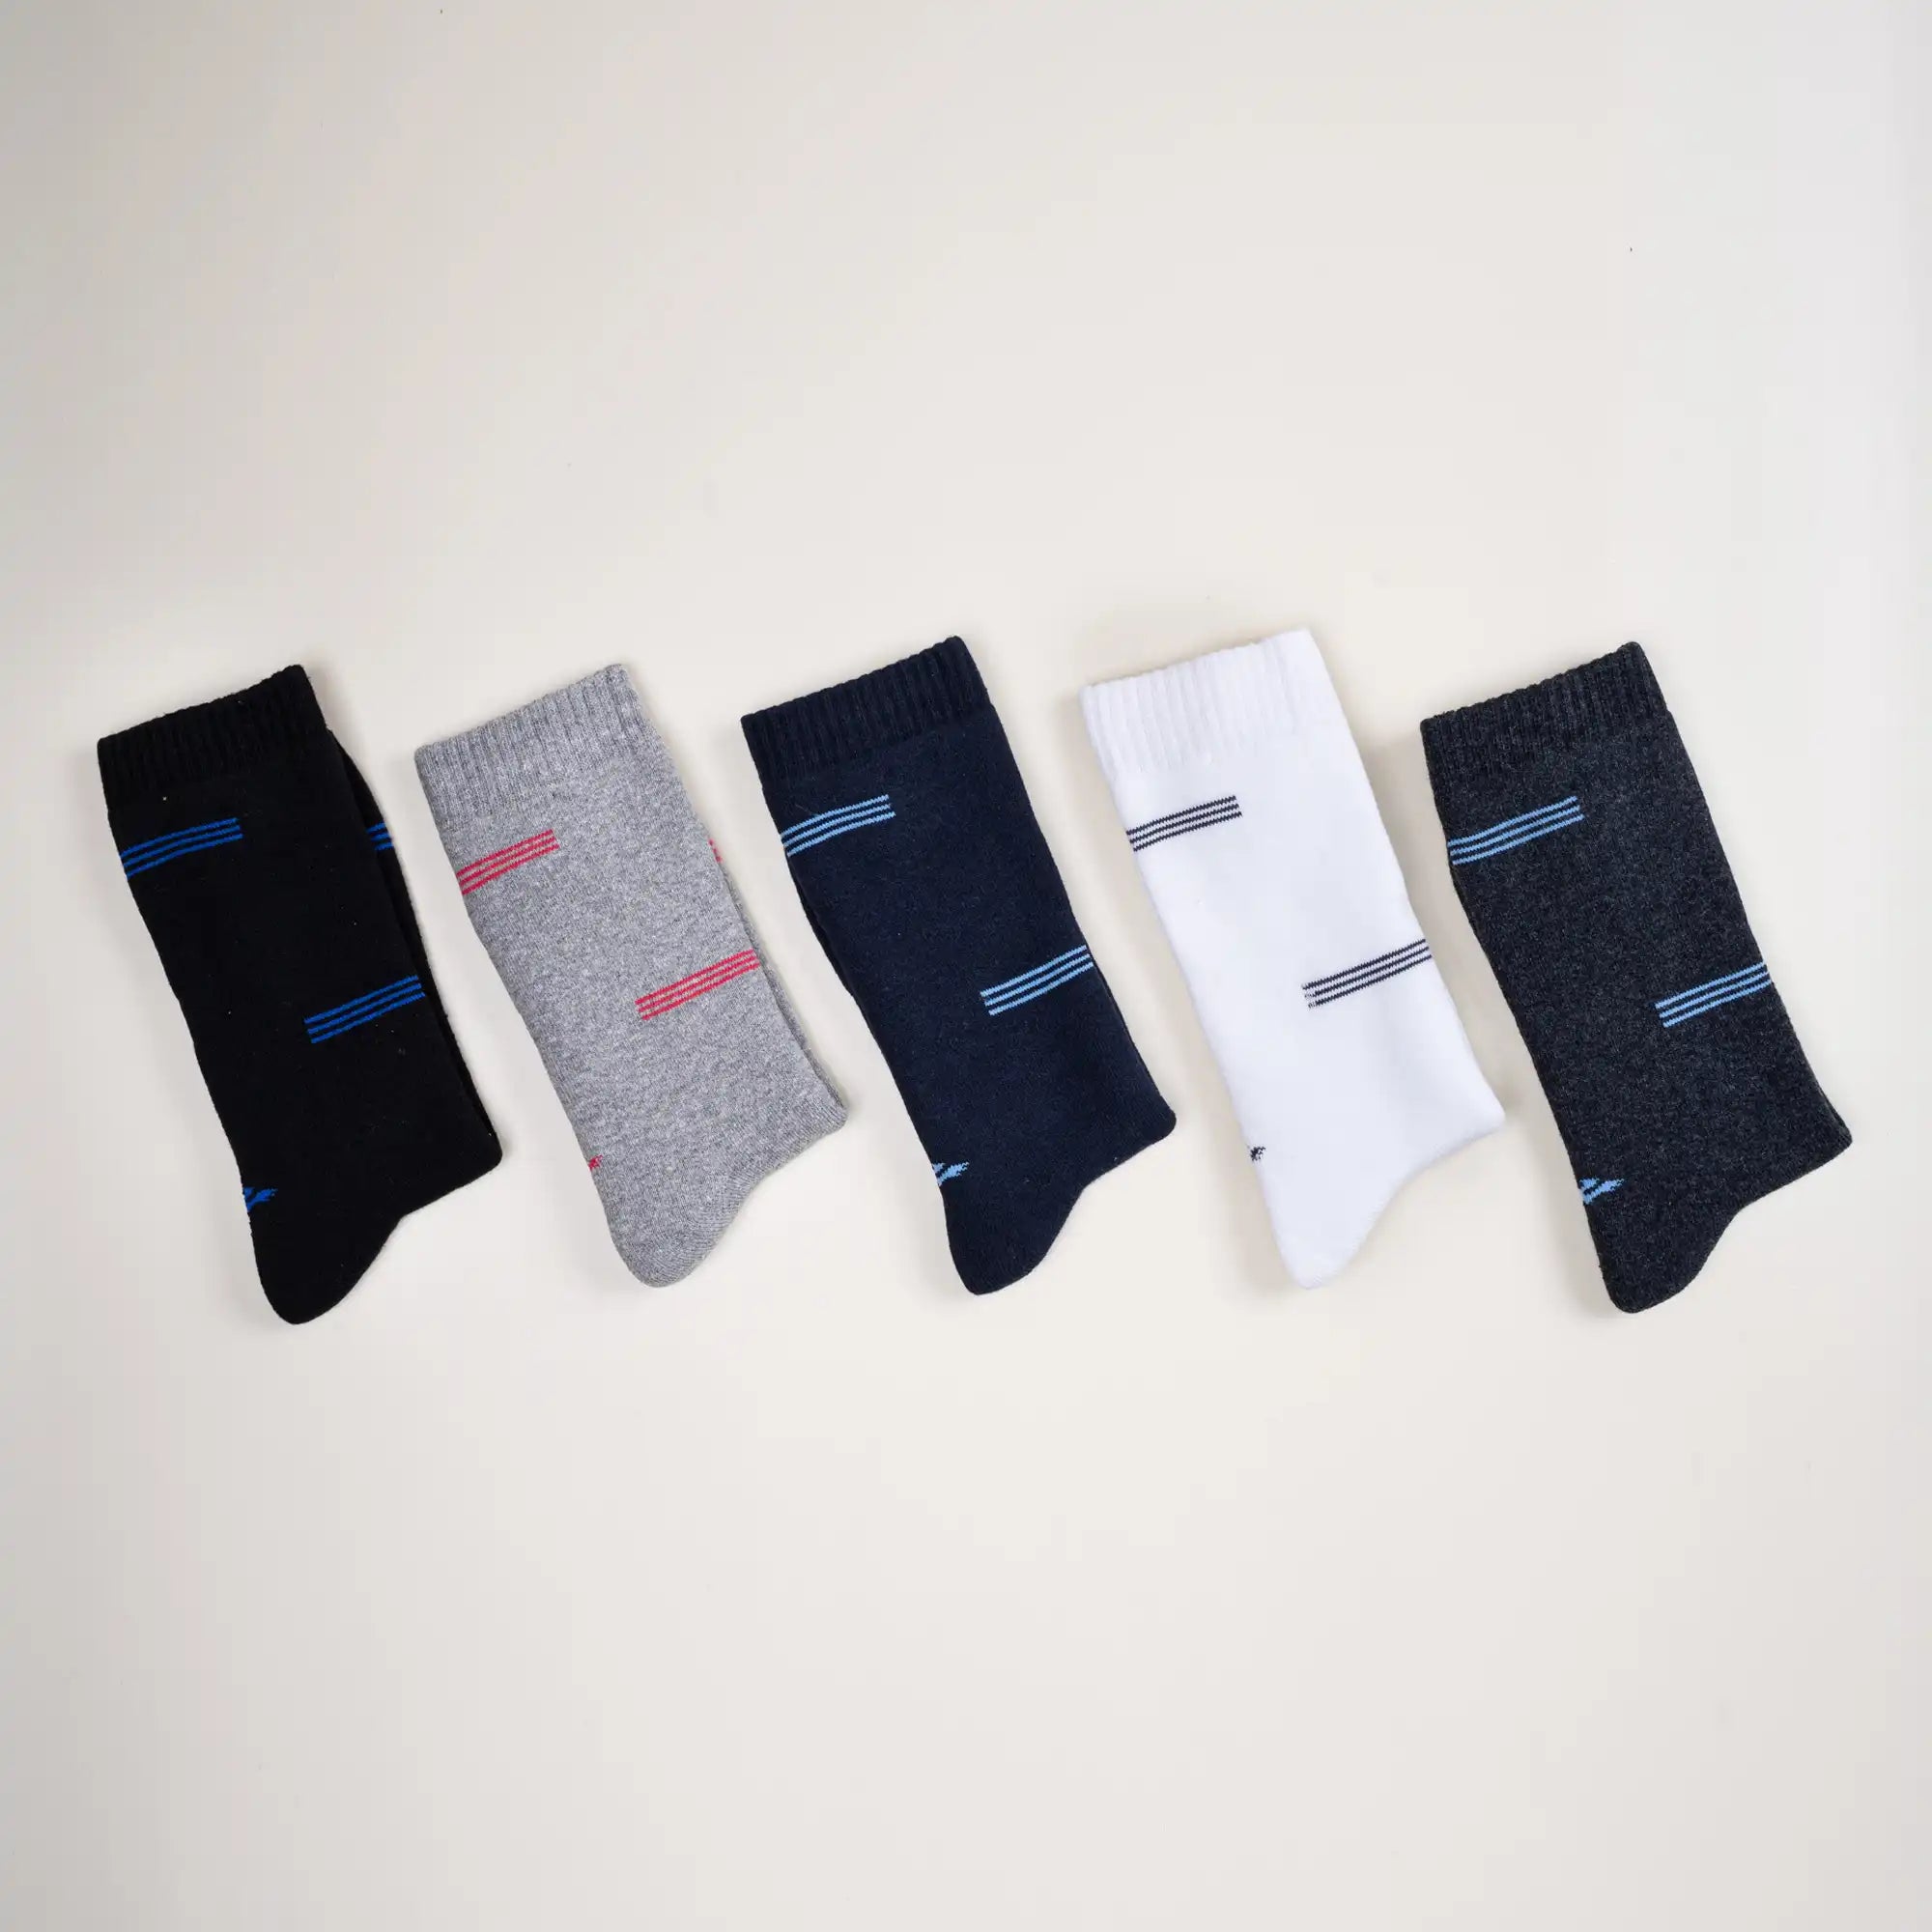 Young Wings Men's Multi Colour Cotton Fabric Design Full Length Socks - Pack of 3, Style no. M1-373